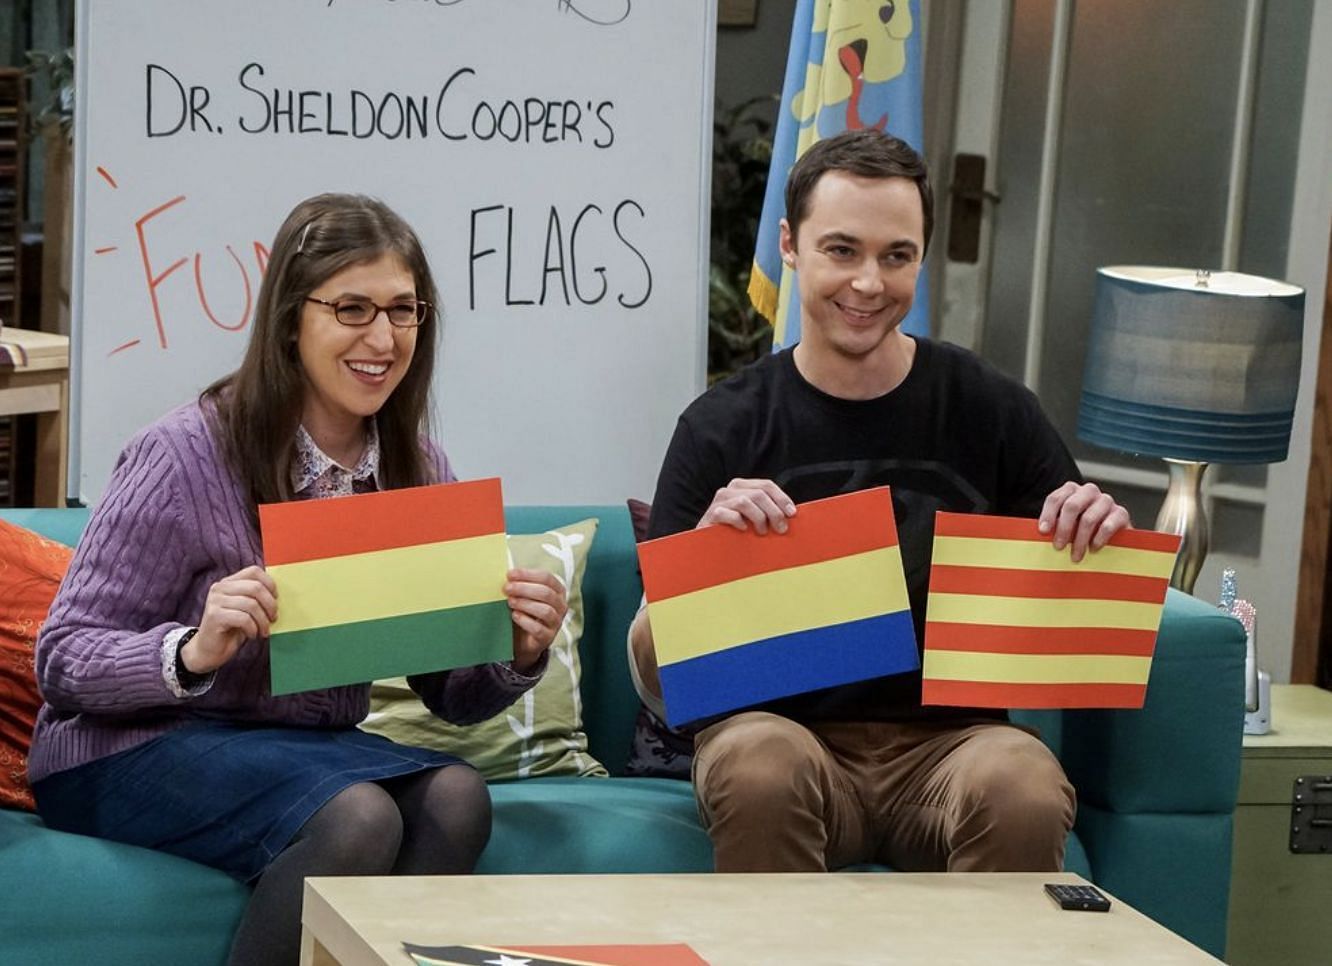 A still of Amy and Sheldon from The Big Bang Theory. (Image via Instagram/@bigbangtheory)